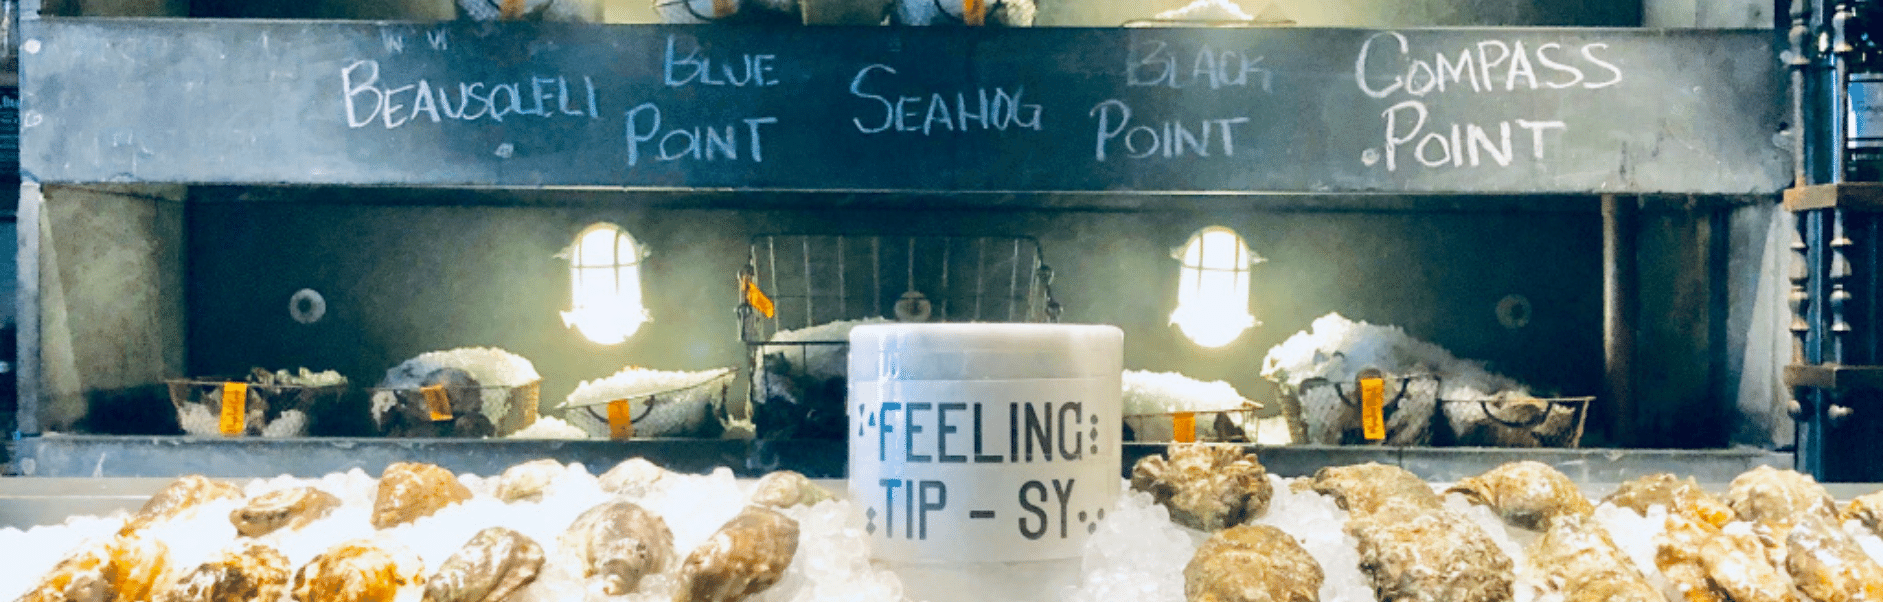 Best Upscale Oyster Bars in New Orleans - The Accidental Yat